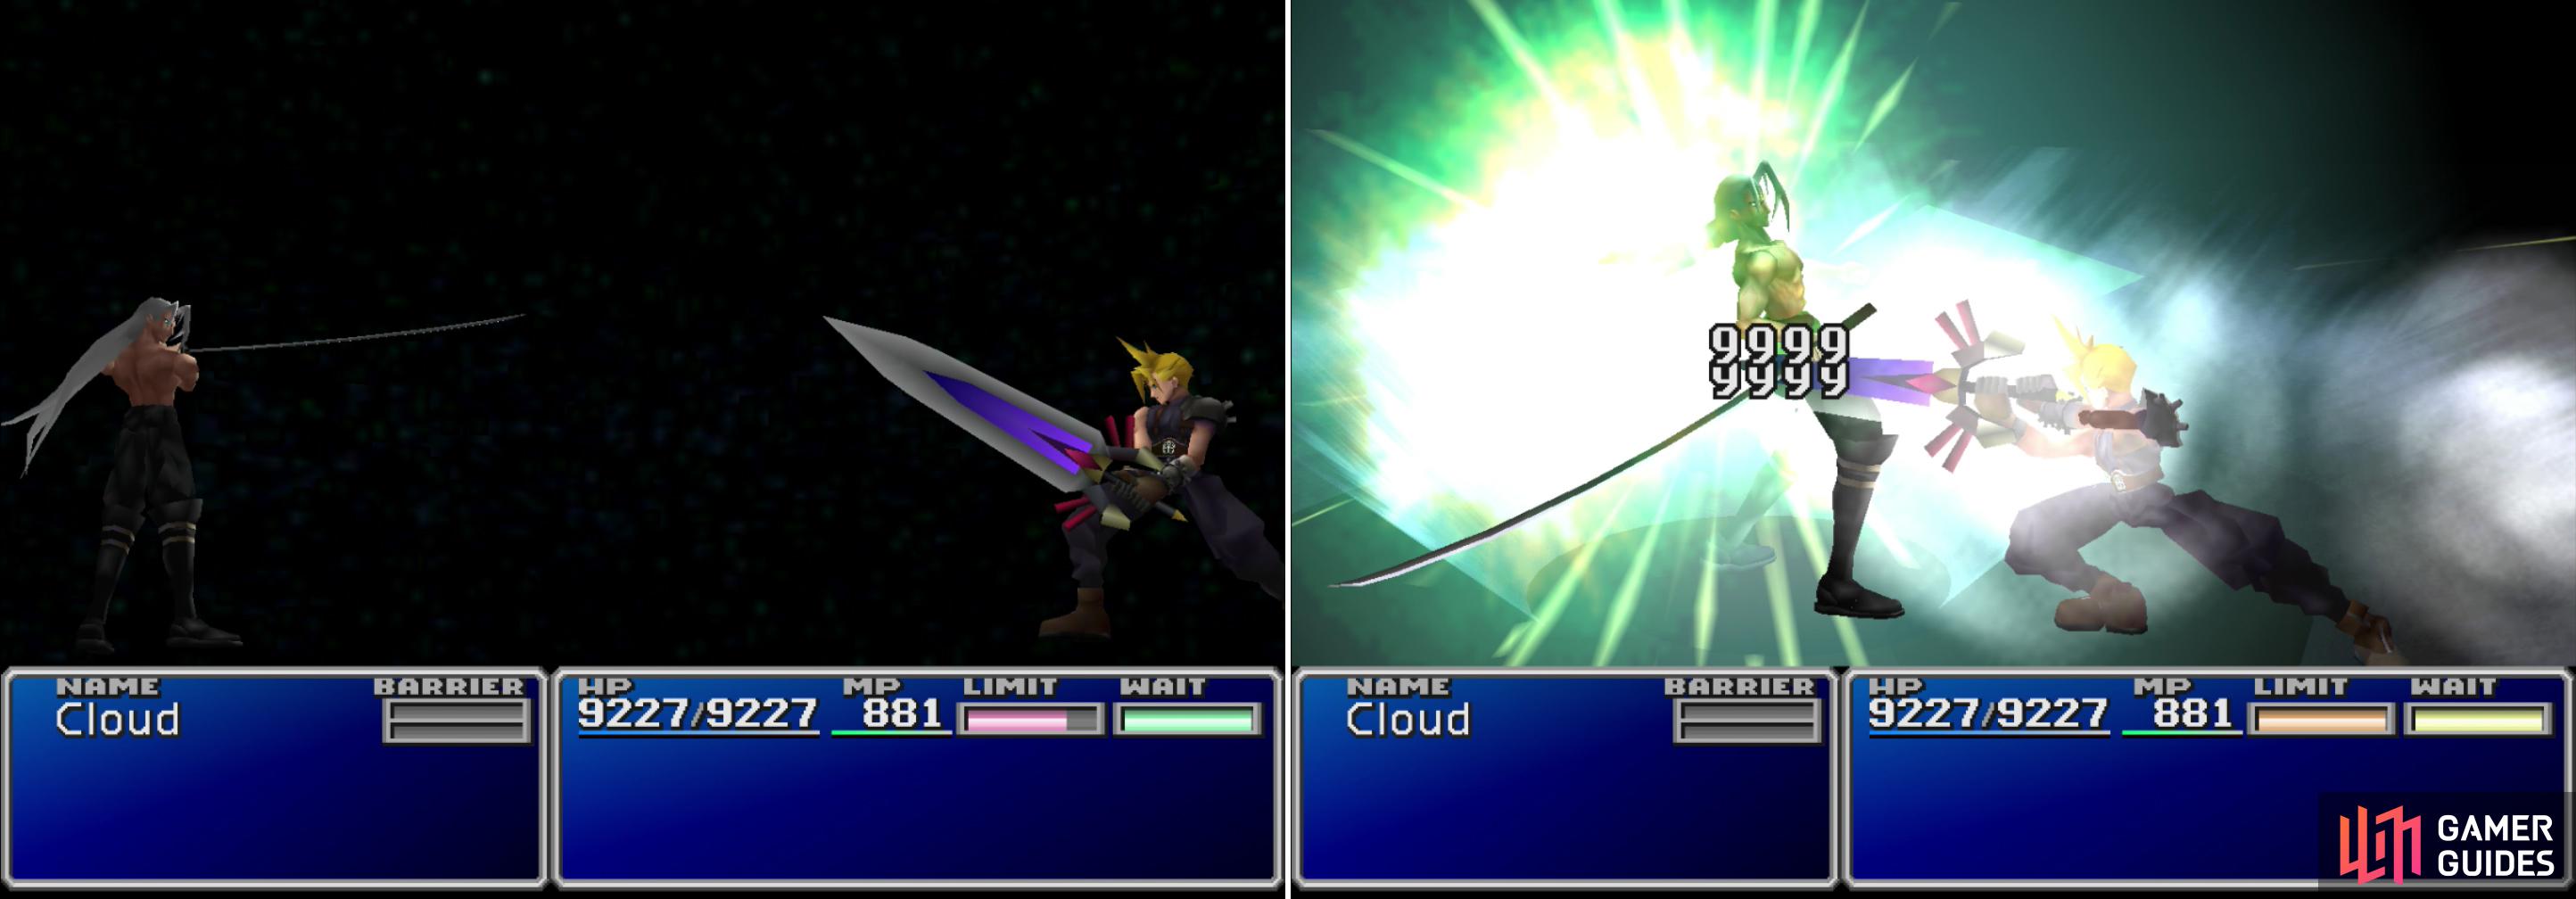 Cloud and Sephiroth will face off one final time (left). After his Limit Meter charges, unleash Cloud's devastating "Omnislash" Limit Break to finally settle the score (right). This one's for you, Aeris.